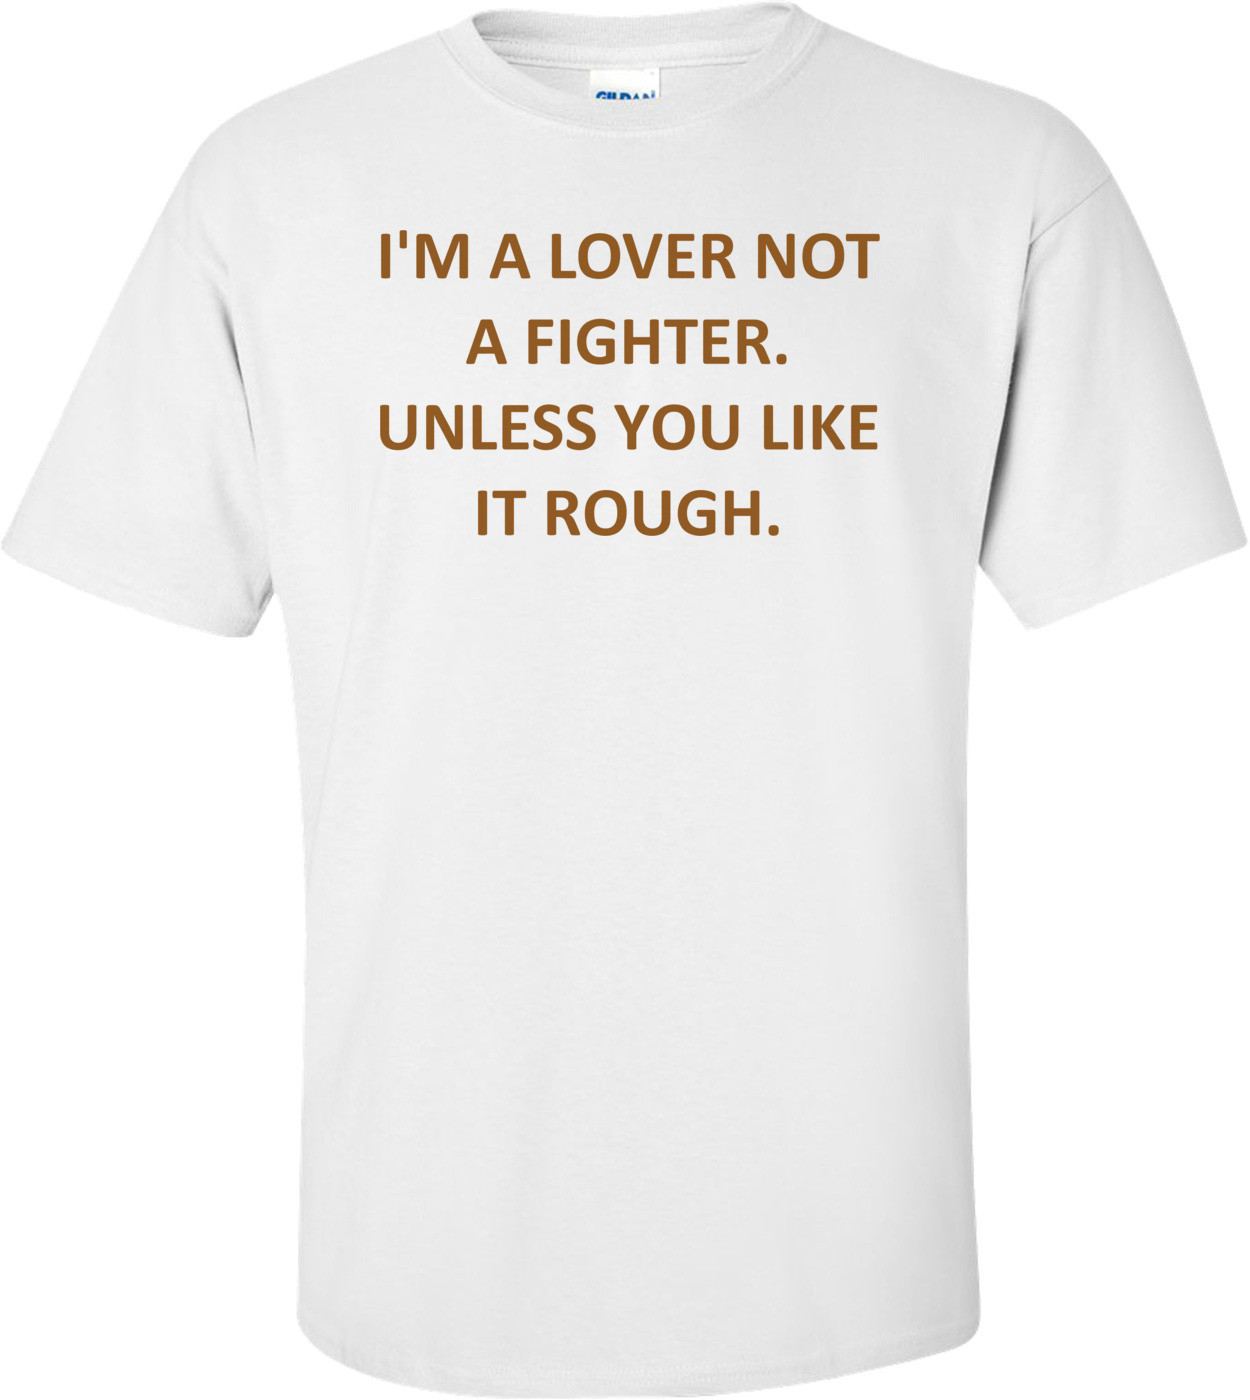 I'M A LOVER NOT A FIGHTER. UNLESS YOU LIKE IT ROUGH. Shirt